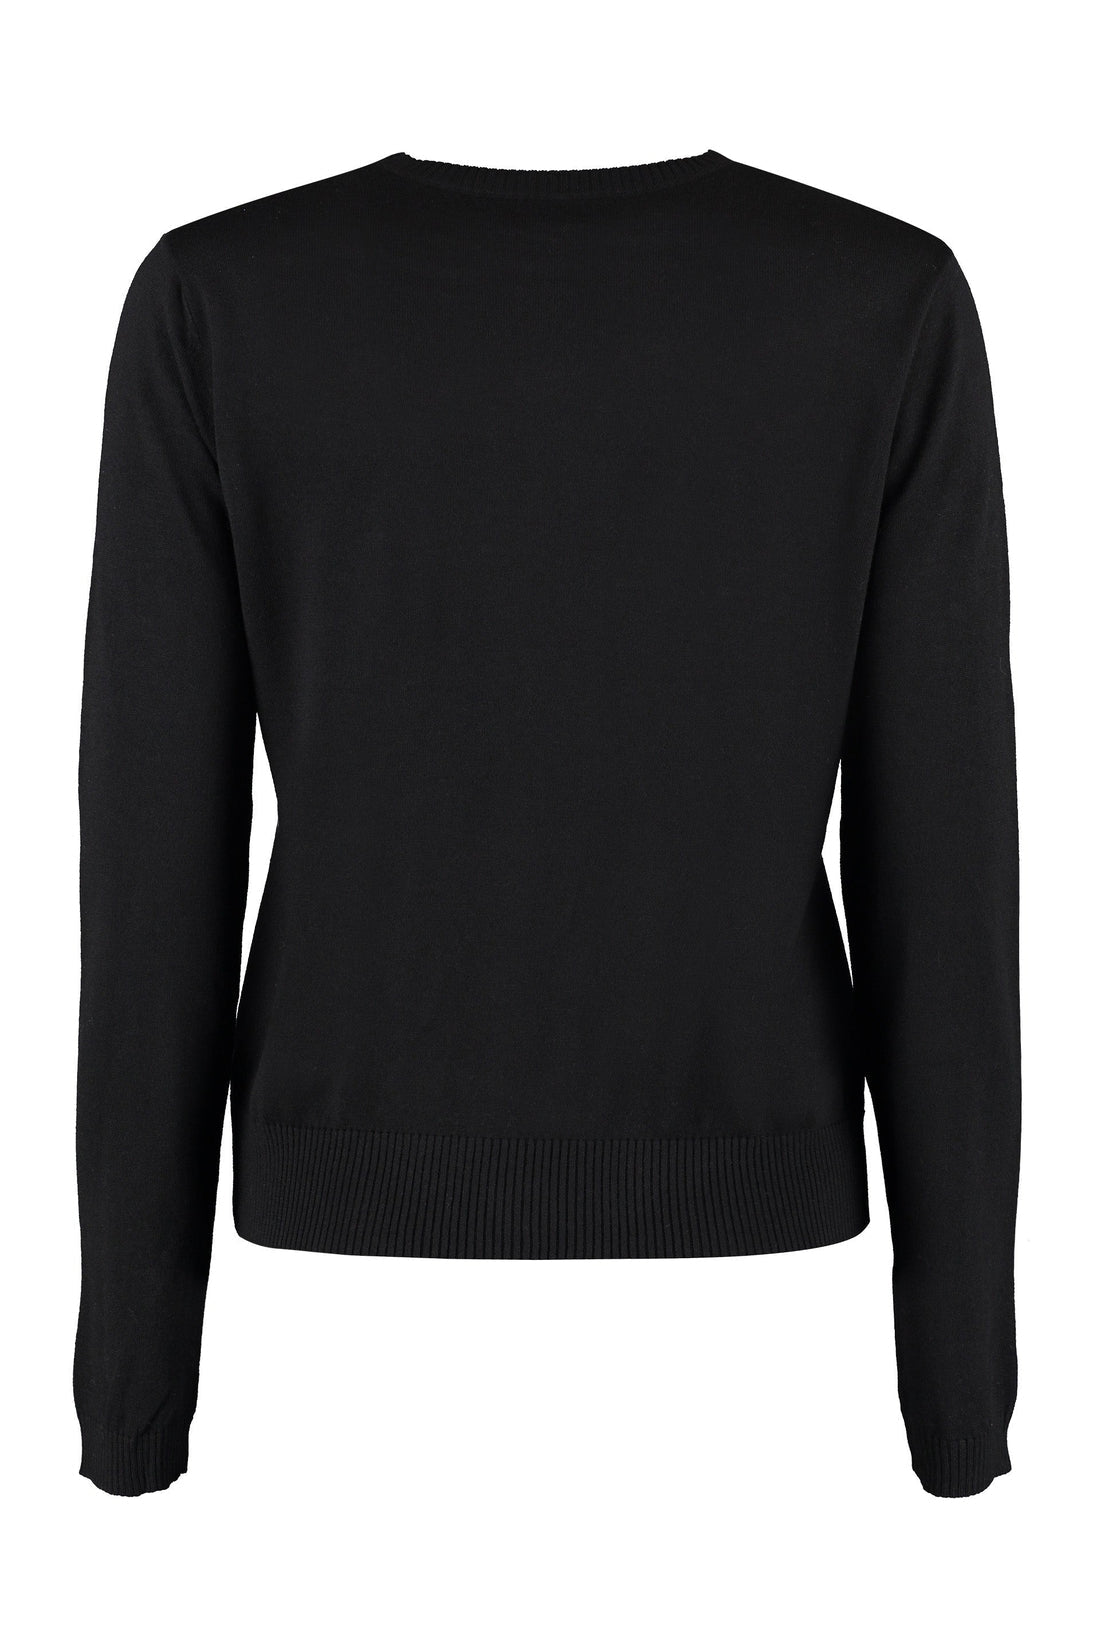 Max Mara-OUTLET-SALE-Ponza long sleeve crew-neck sweater-ARCHIVIST